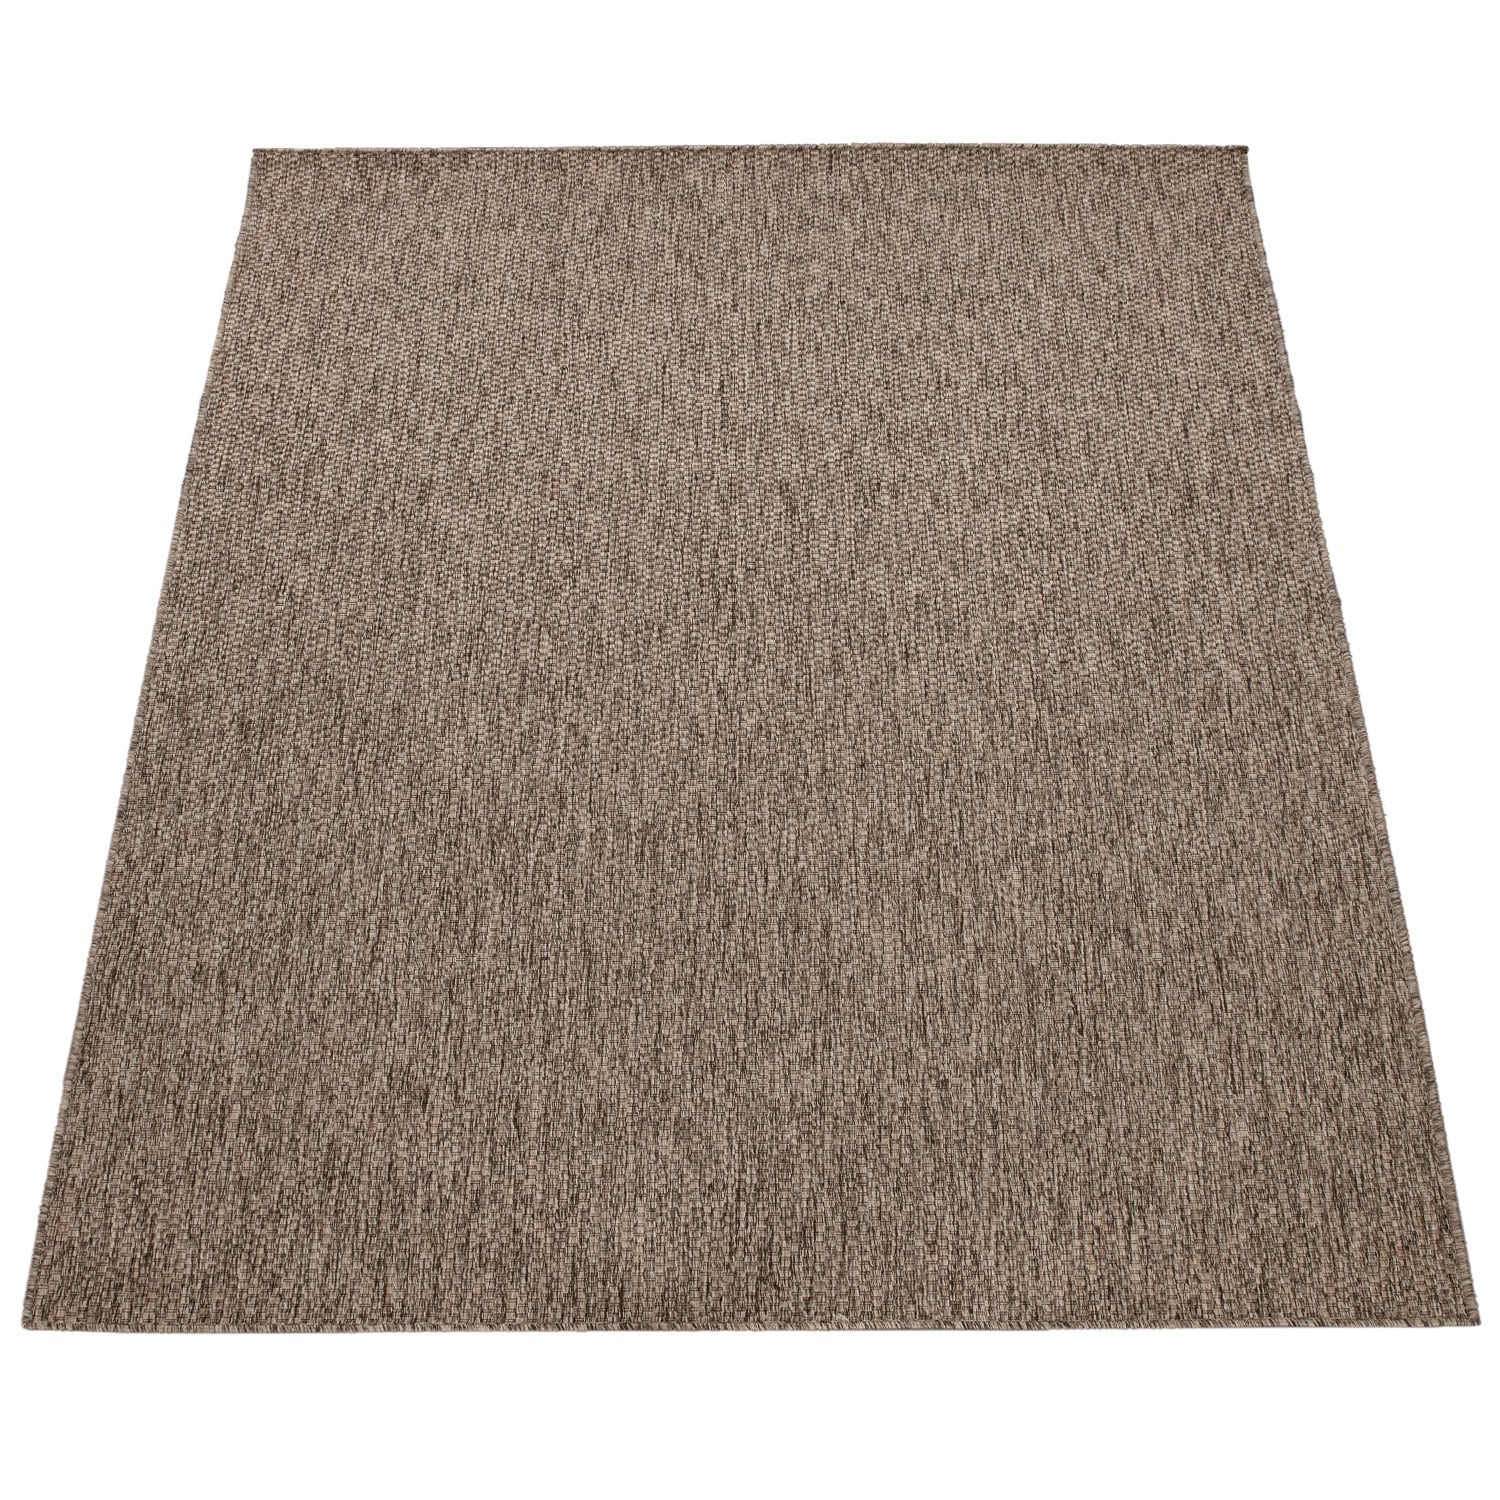 https://ak1.ostkcdn.com/images/products/is/images/direct/326e55dc940104c18305e7788035c29182f975e2/Plain-Outdoor-Rug-Weatherproof-for-Patio-in-different-solid-colors.jpg